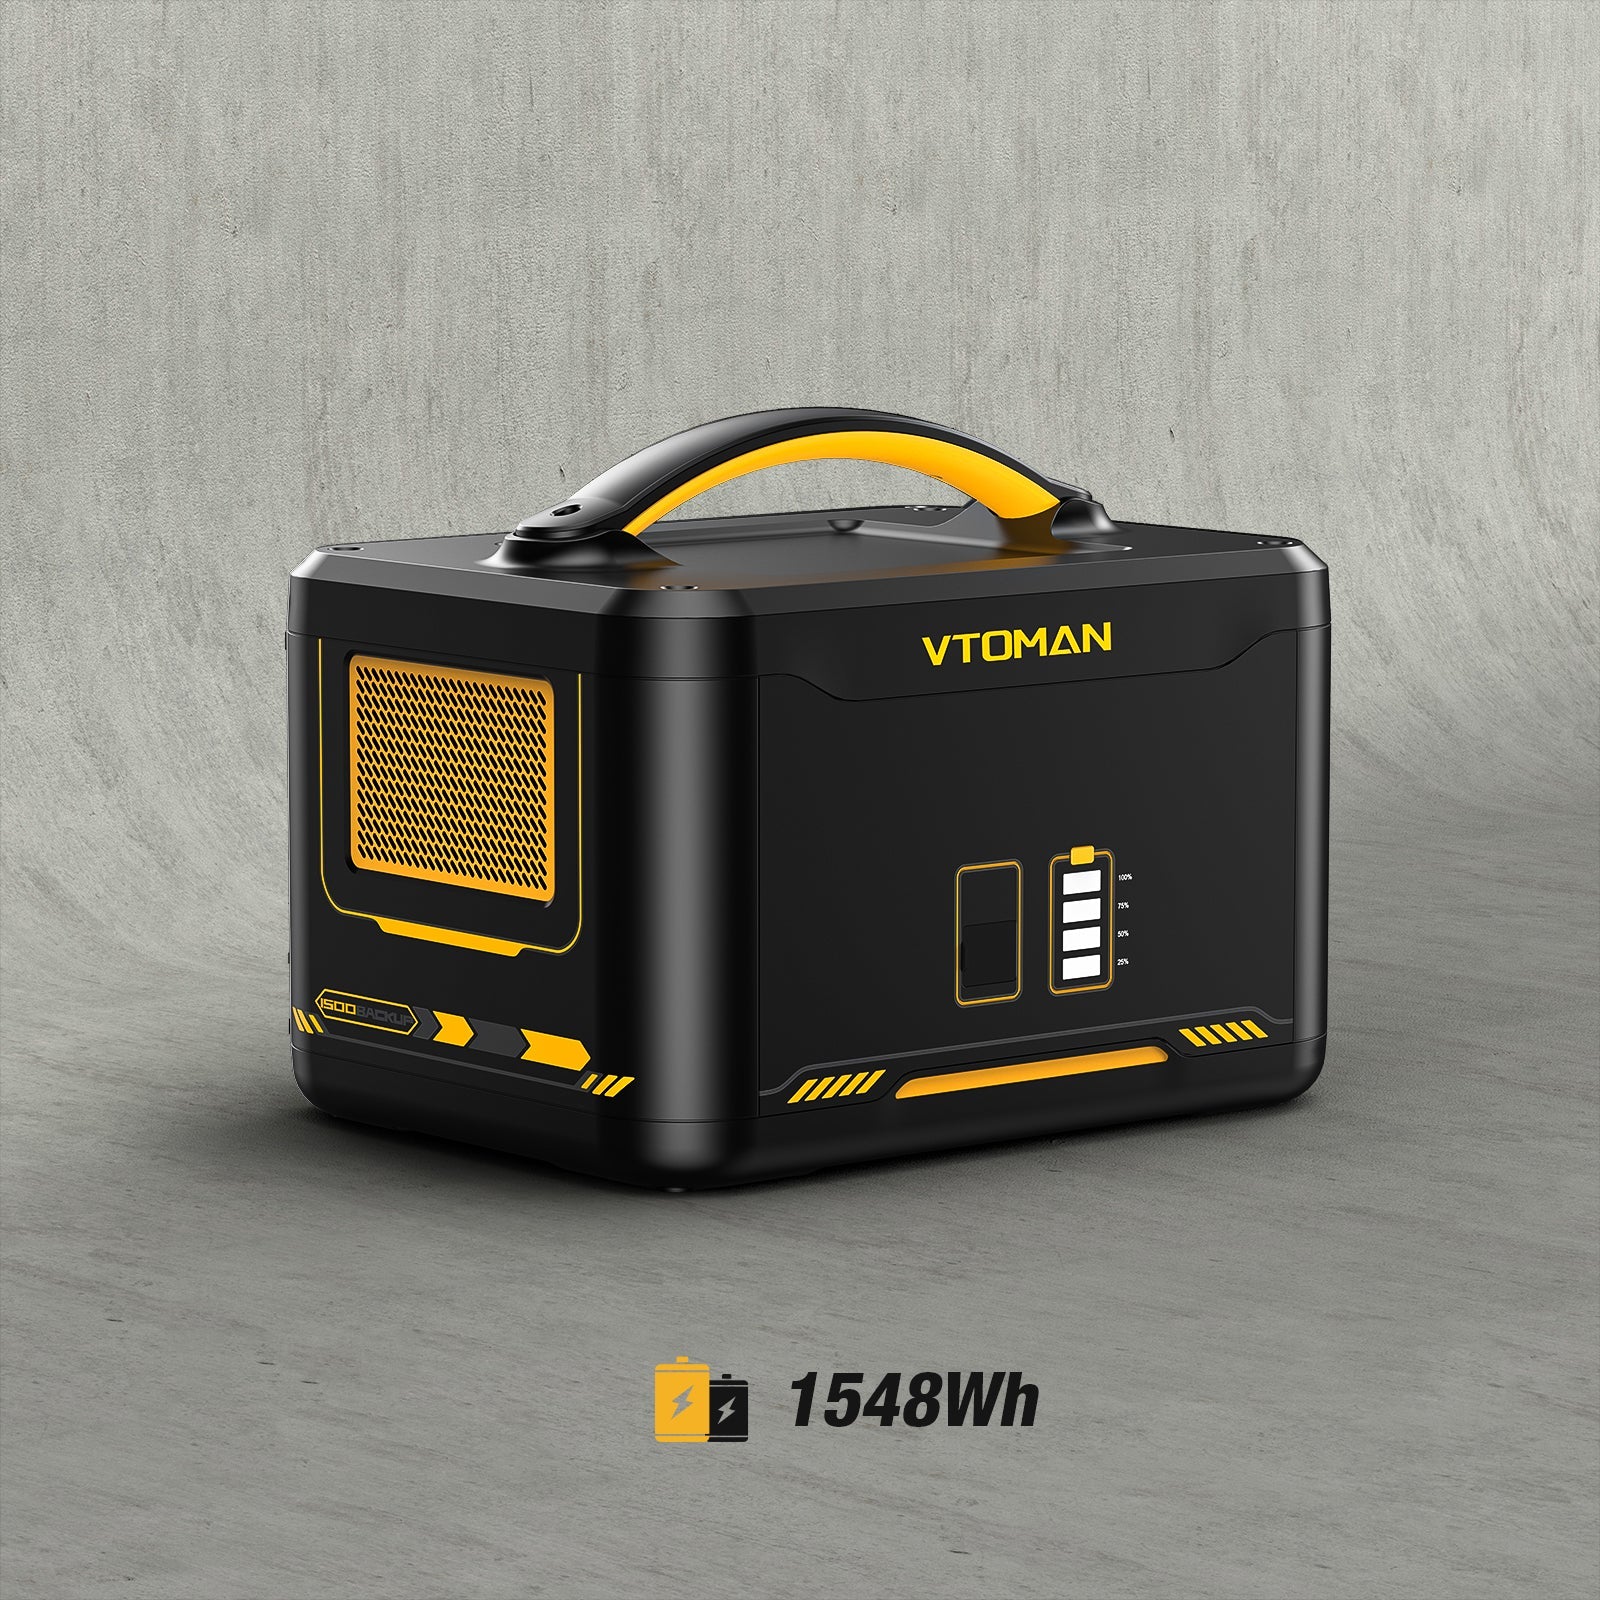 Jump 1800W/6192Wh 440W Solar Generator With Four Carrying Case Bag